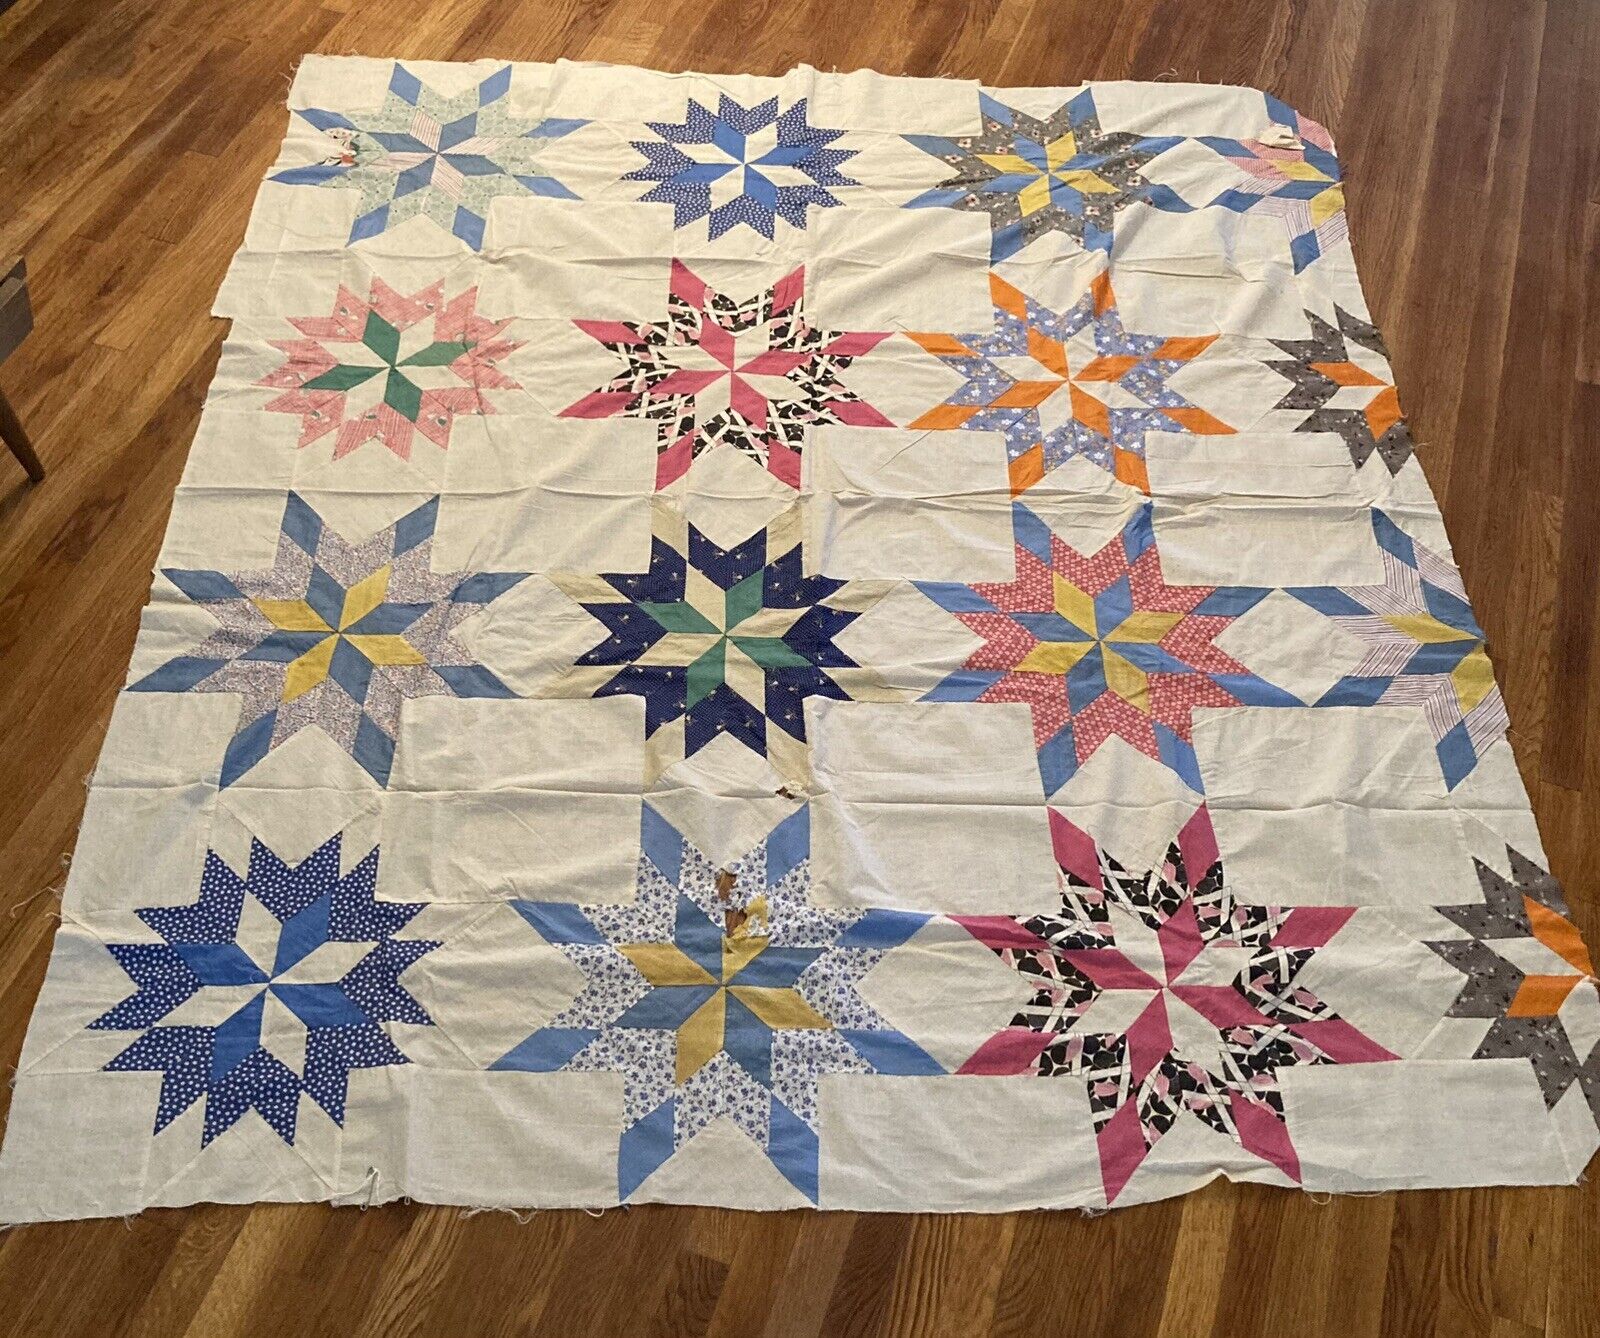 Vintage Star Quilt Top -- Unbleached Linen and Mid-century Prints -- Lovely